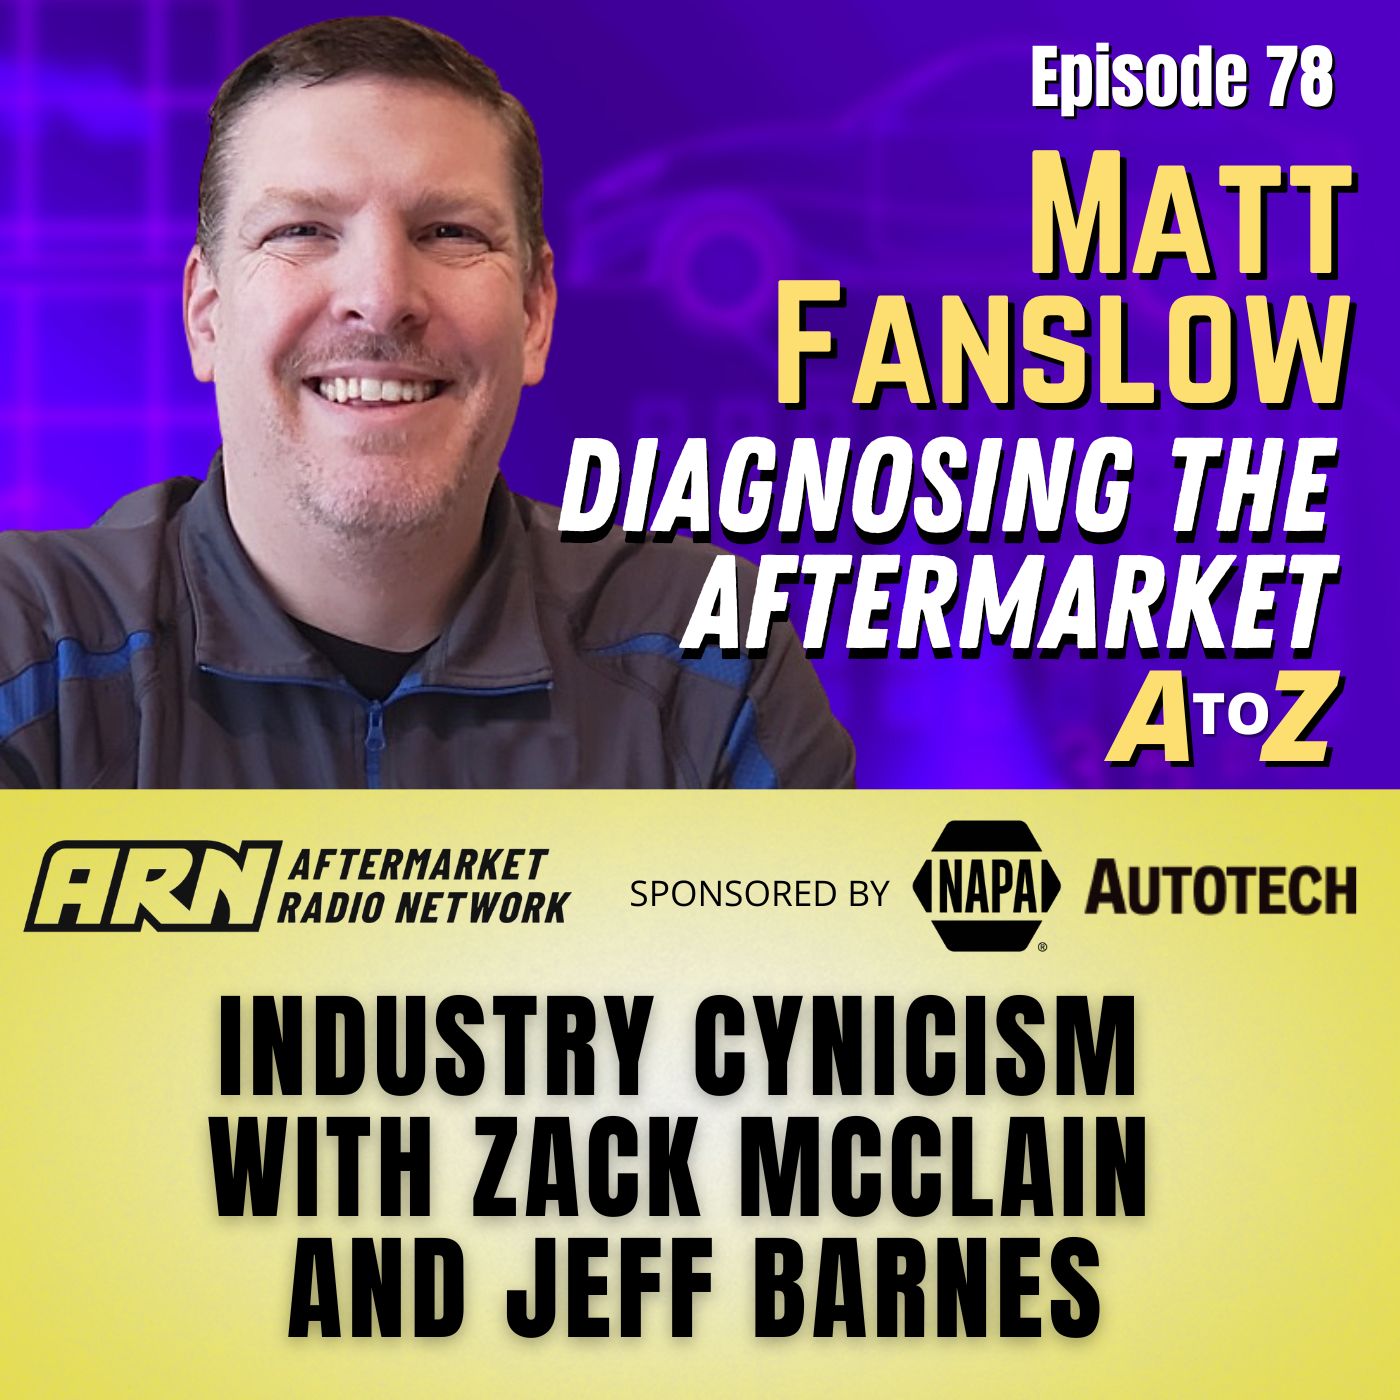 Artwork for podcast Diagnosing the Aftermarket A to Z